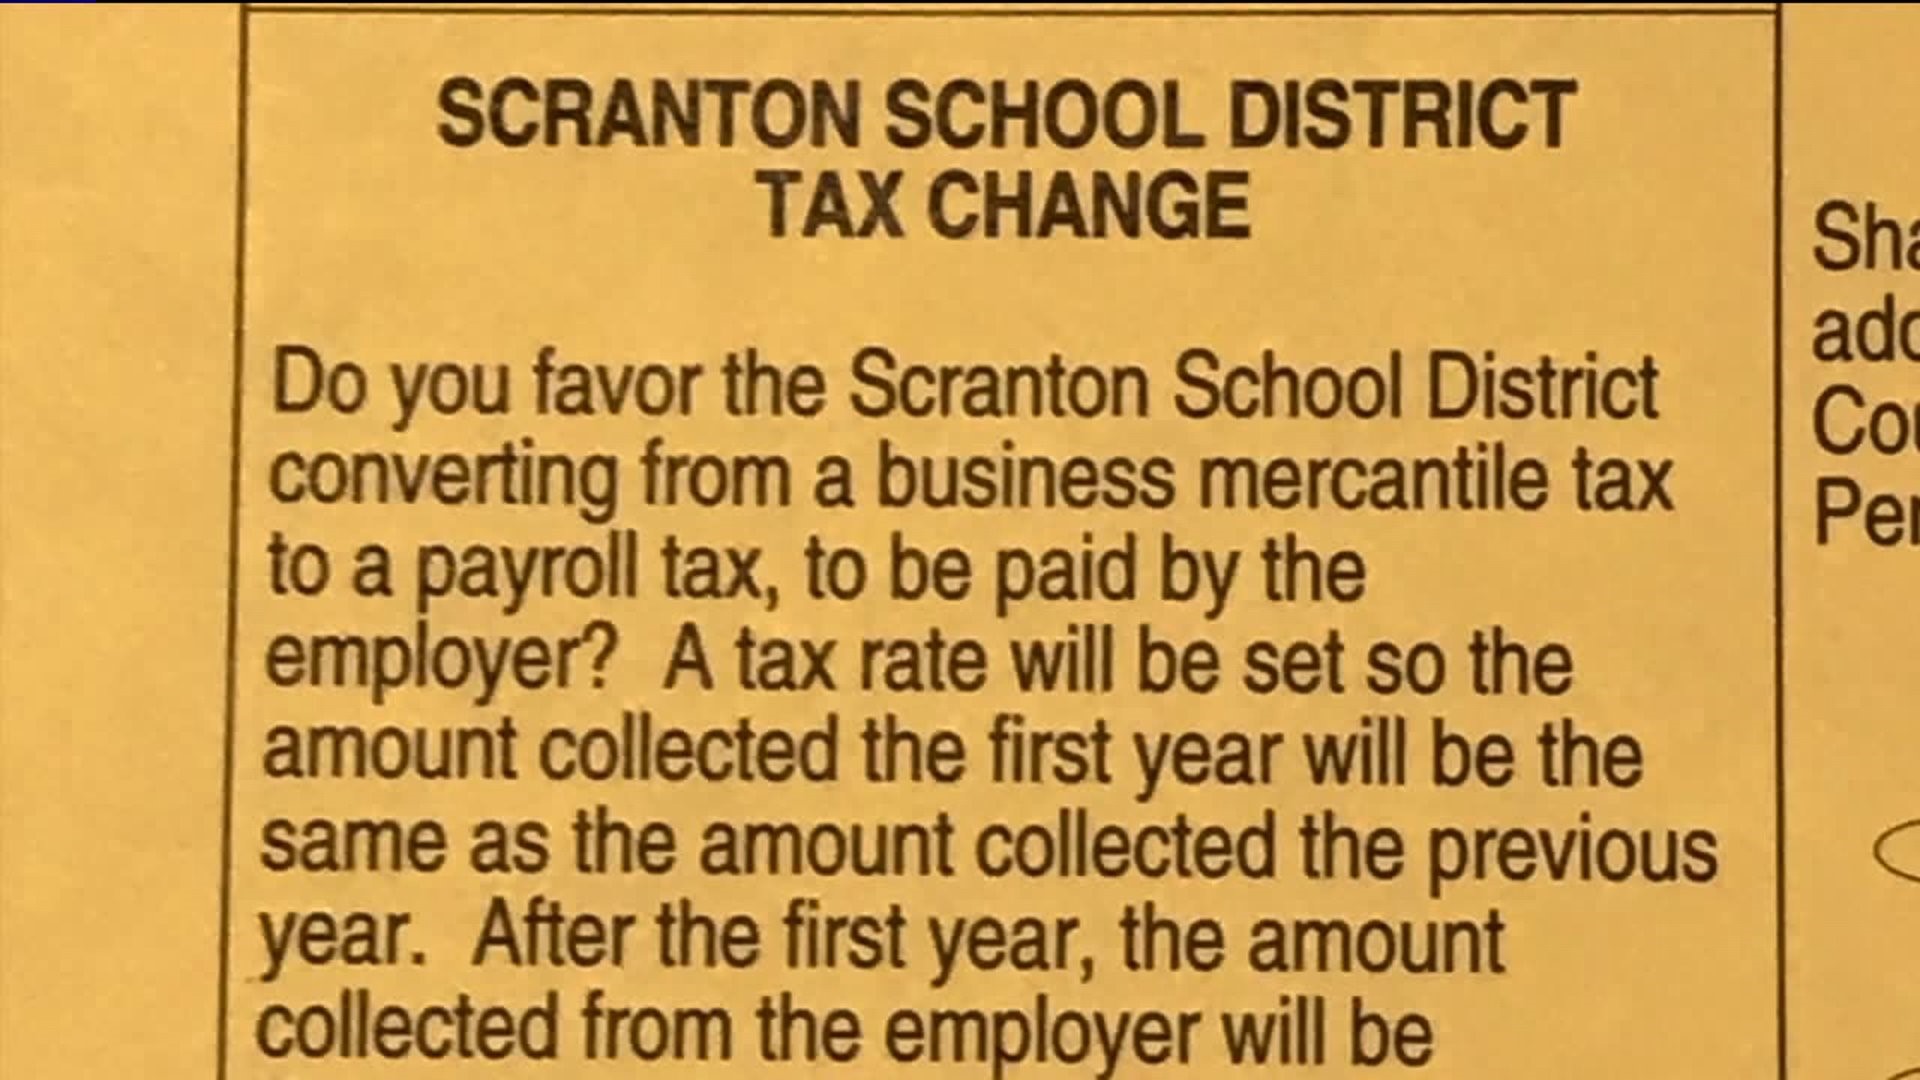 Voters in Scranton to Consider Payroll Tax